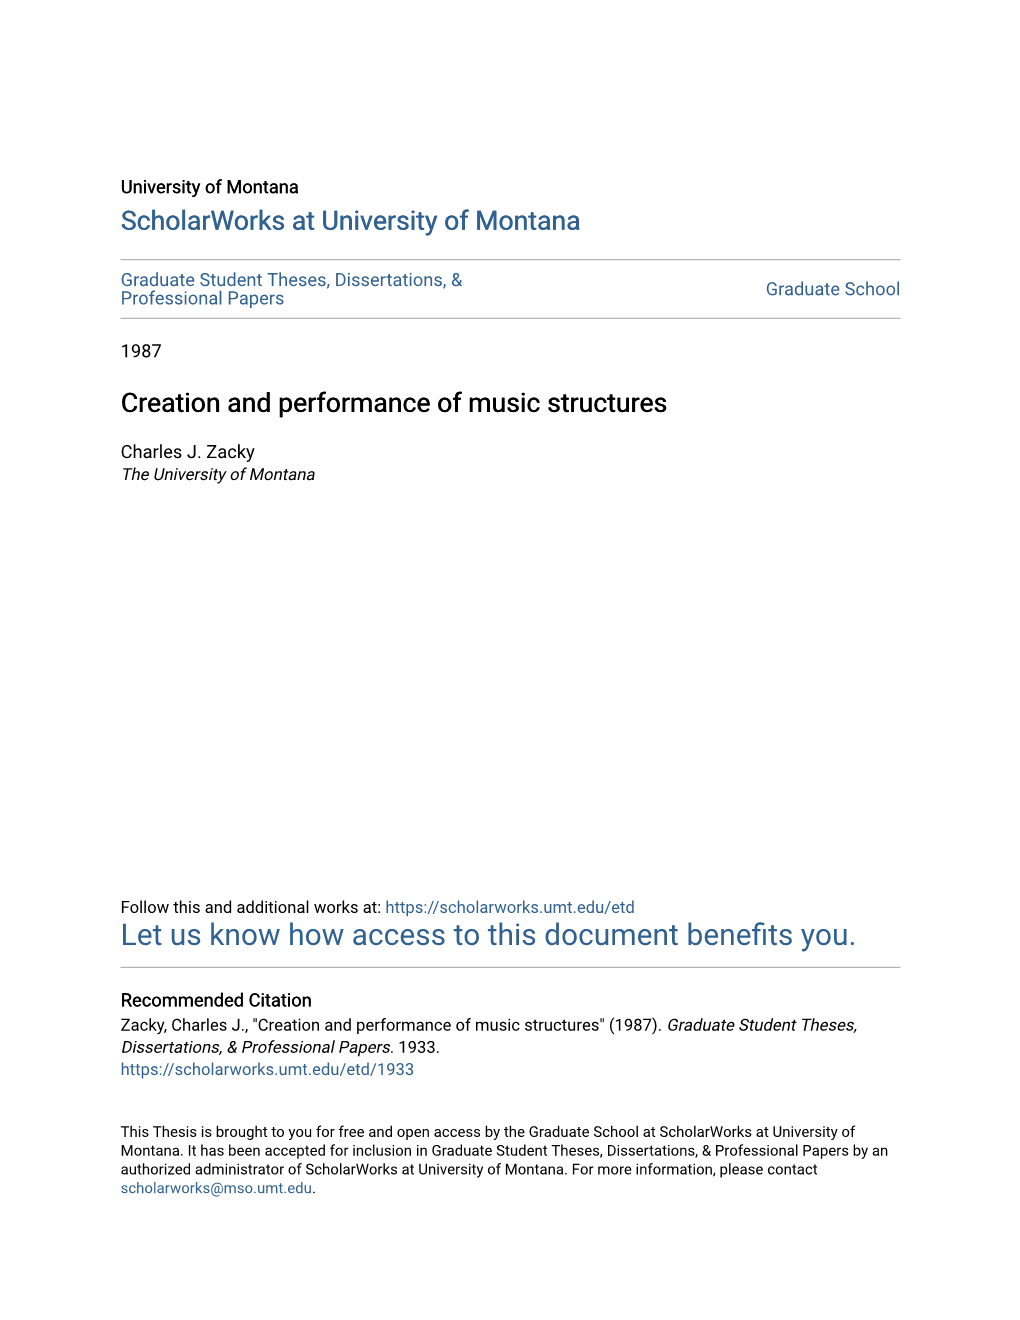 Creation and Performance of Music Structures